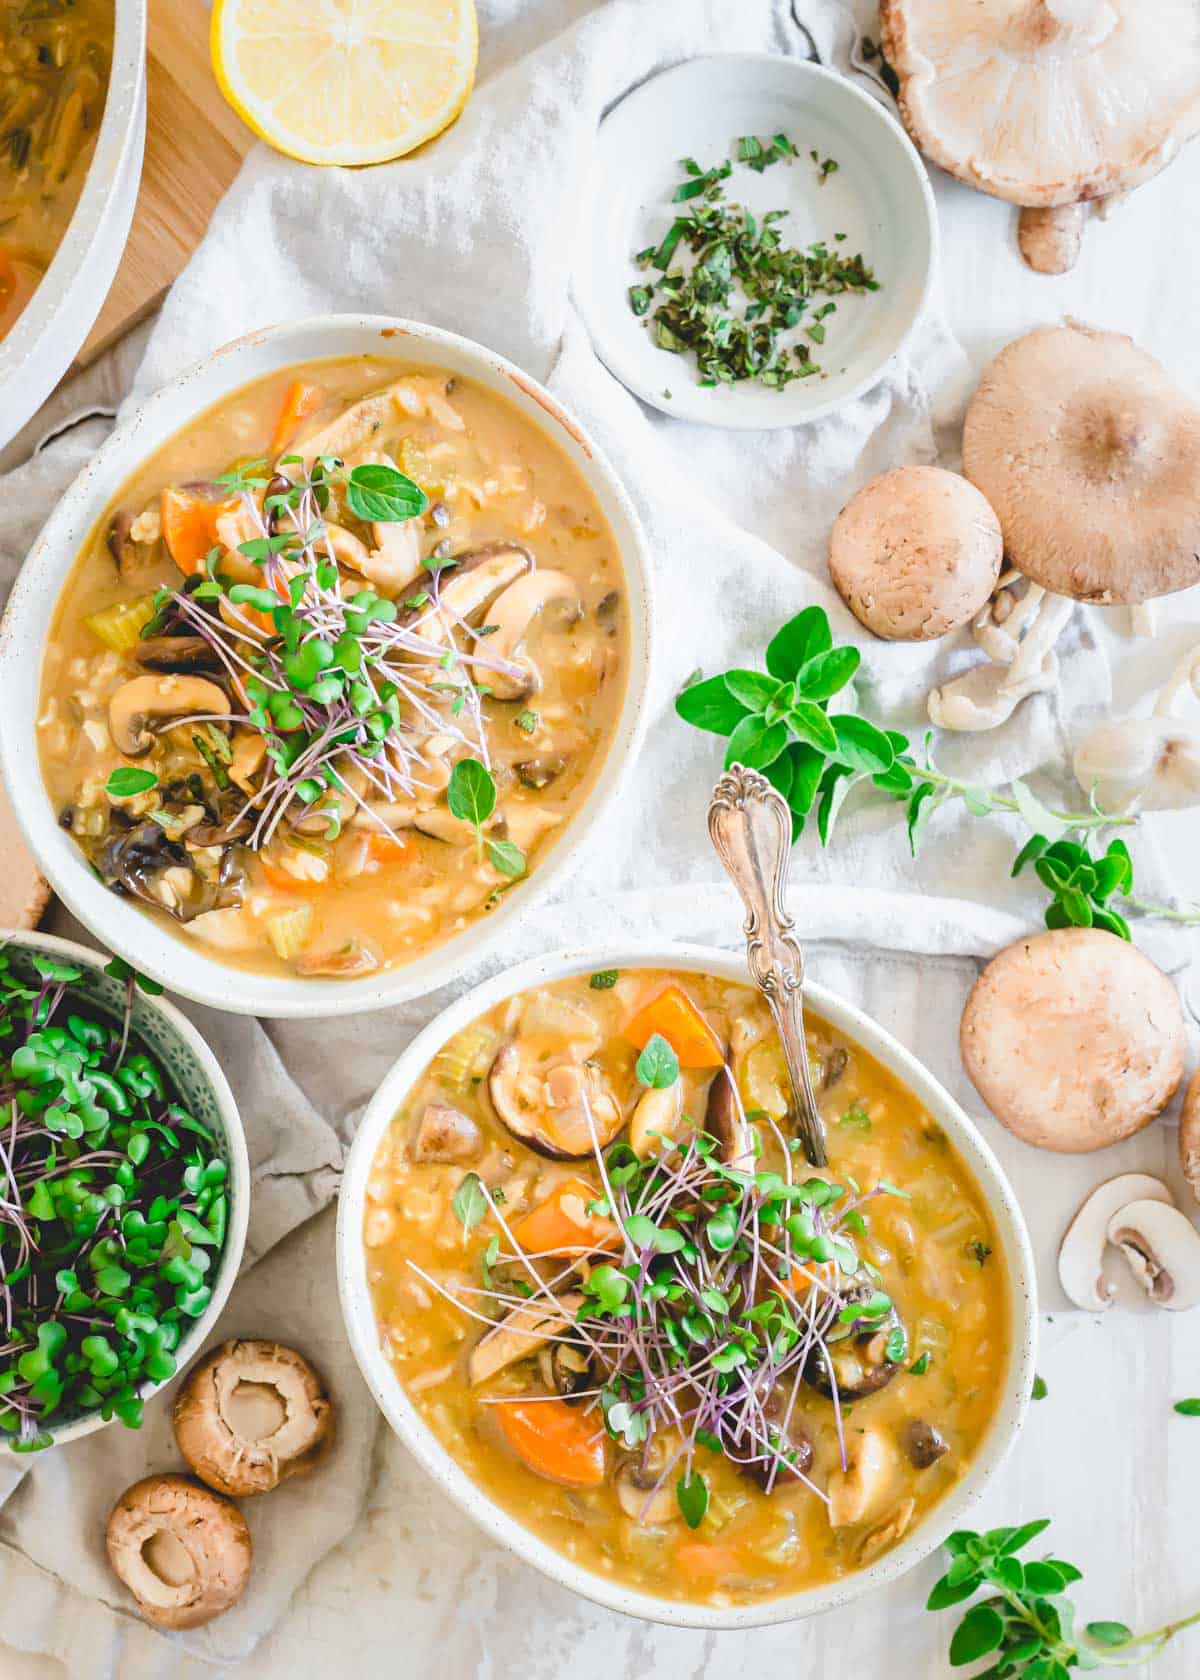 Wild mushroom soup recipe garnished with micro-greens in bowls with spoons.